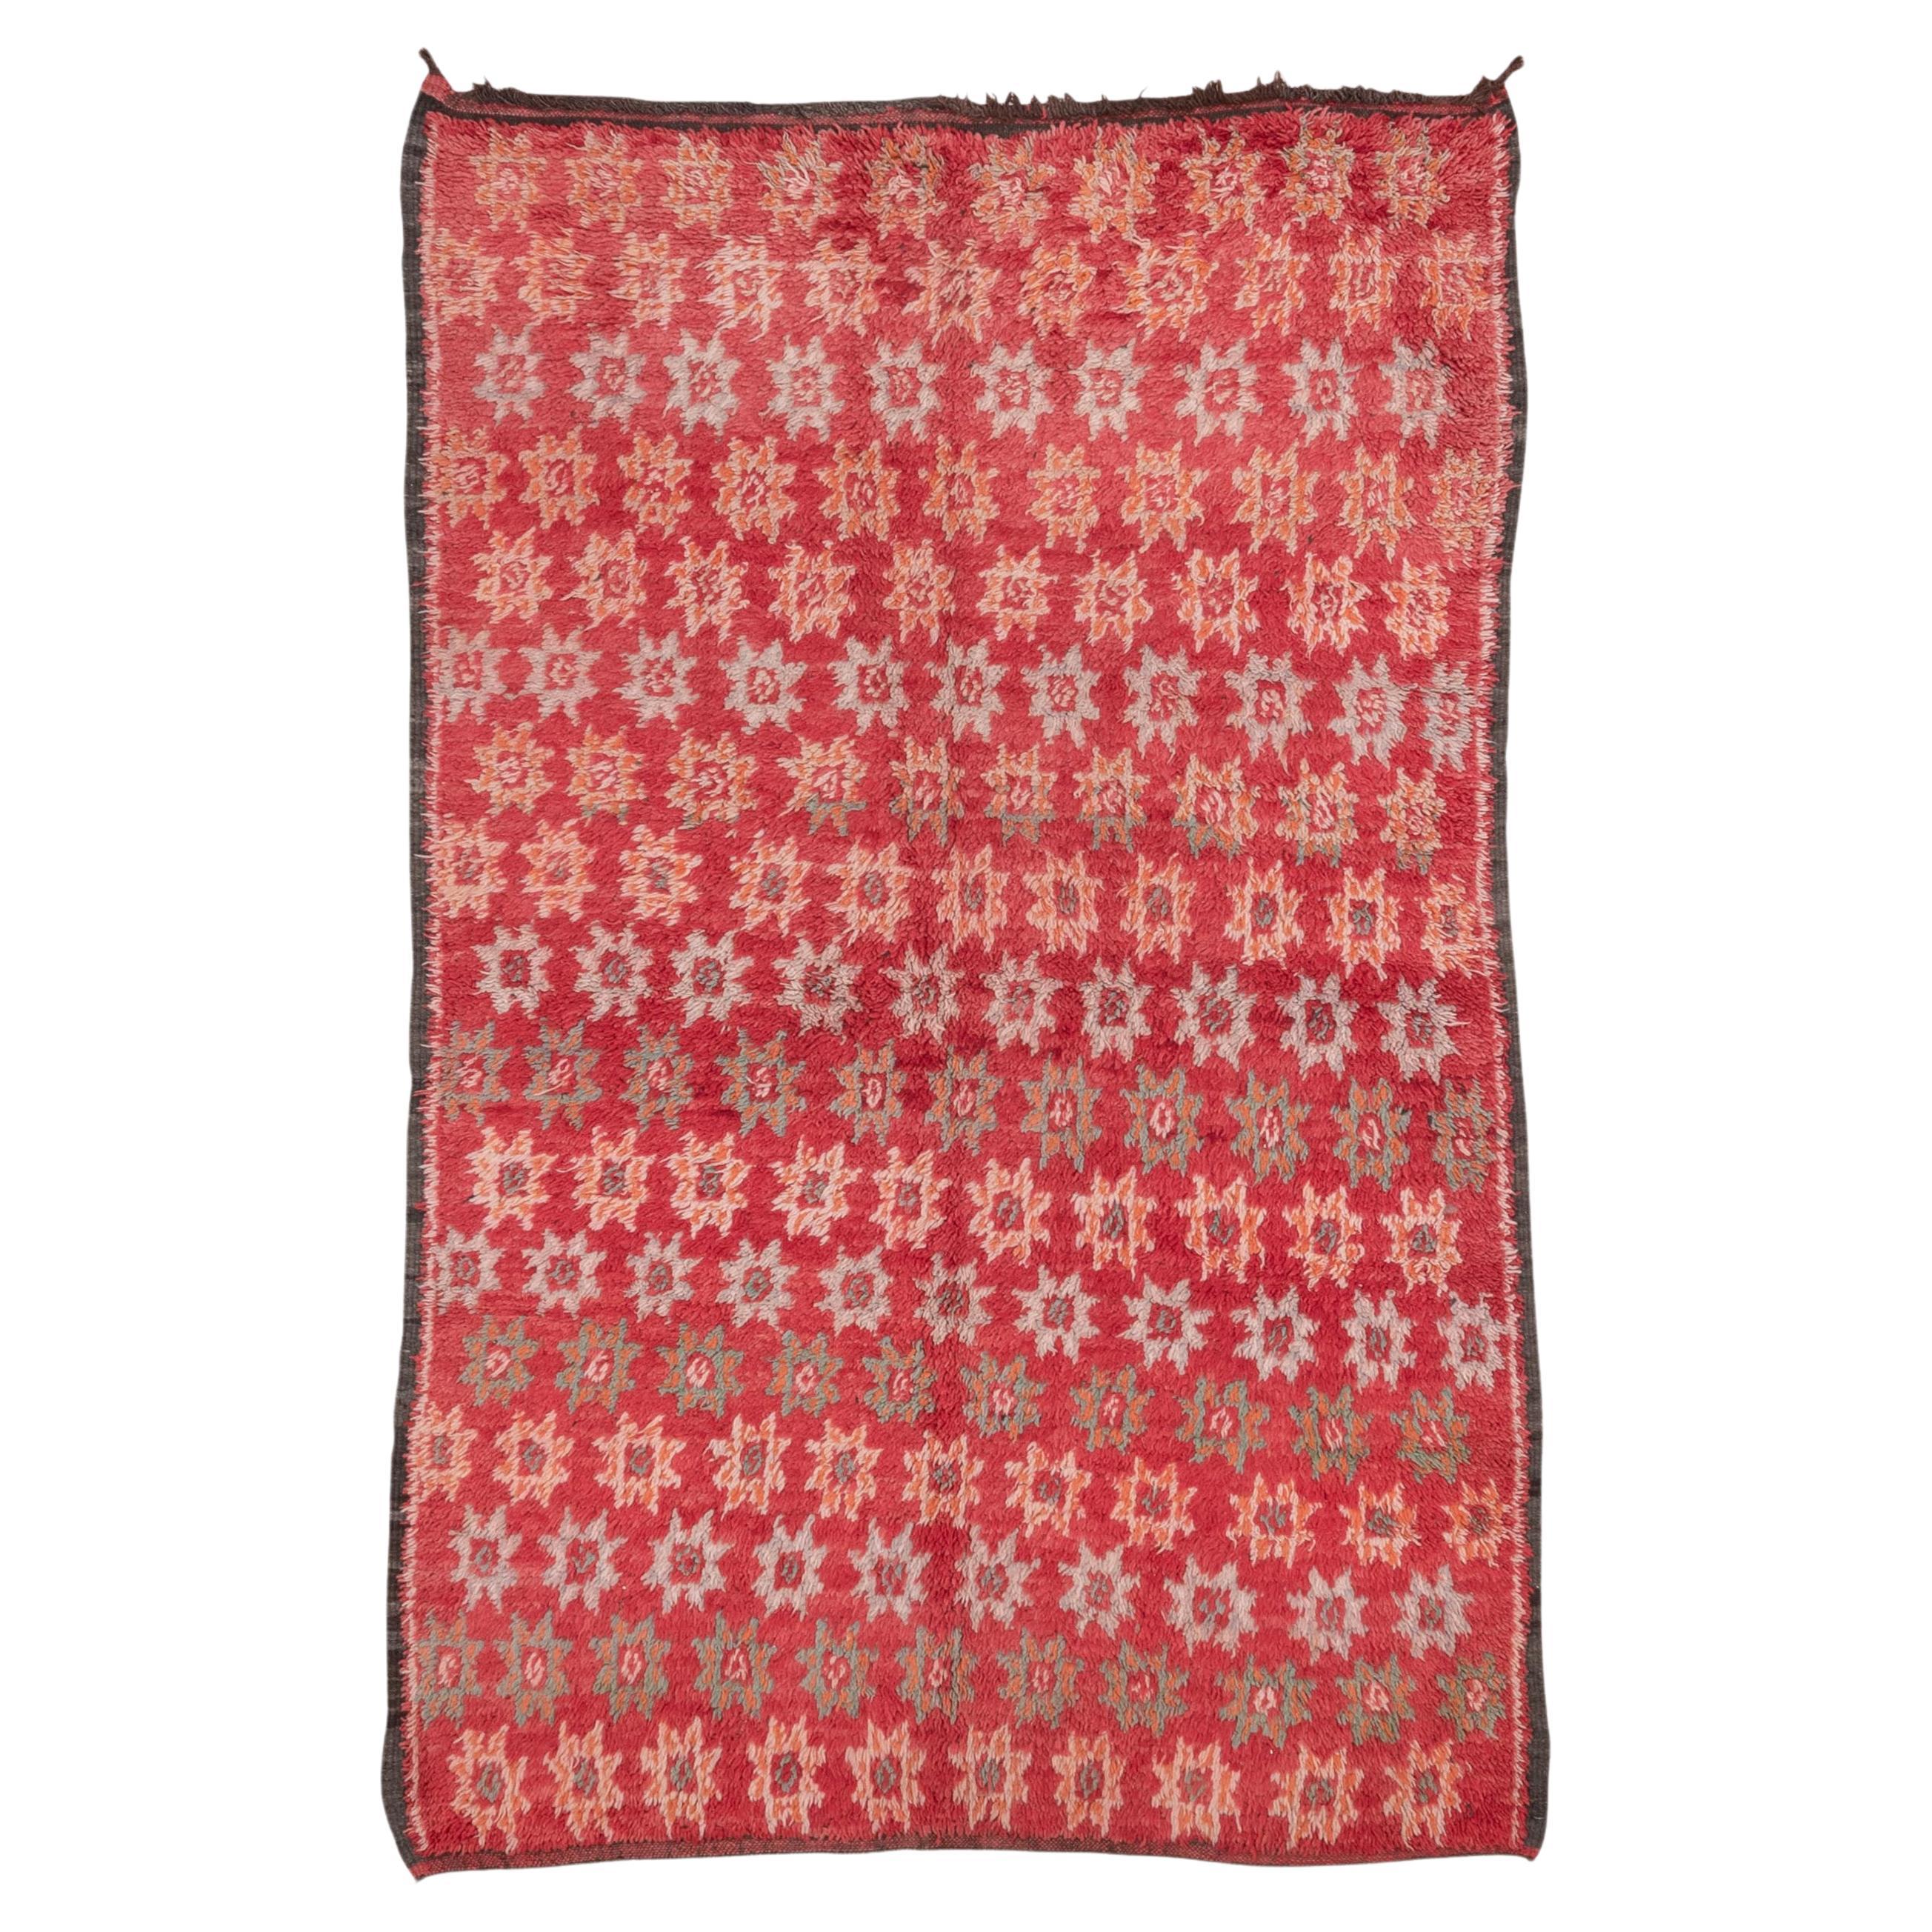 Star Motif Cherry Red in Pink Multicolor Large Accent Rug 